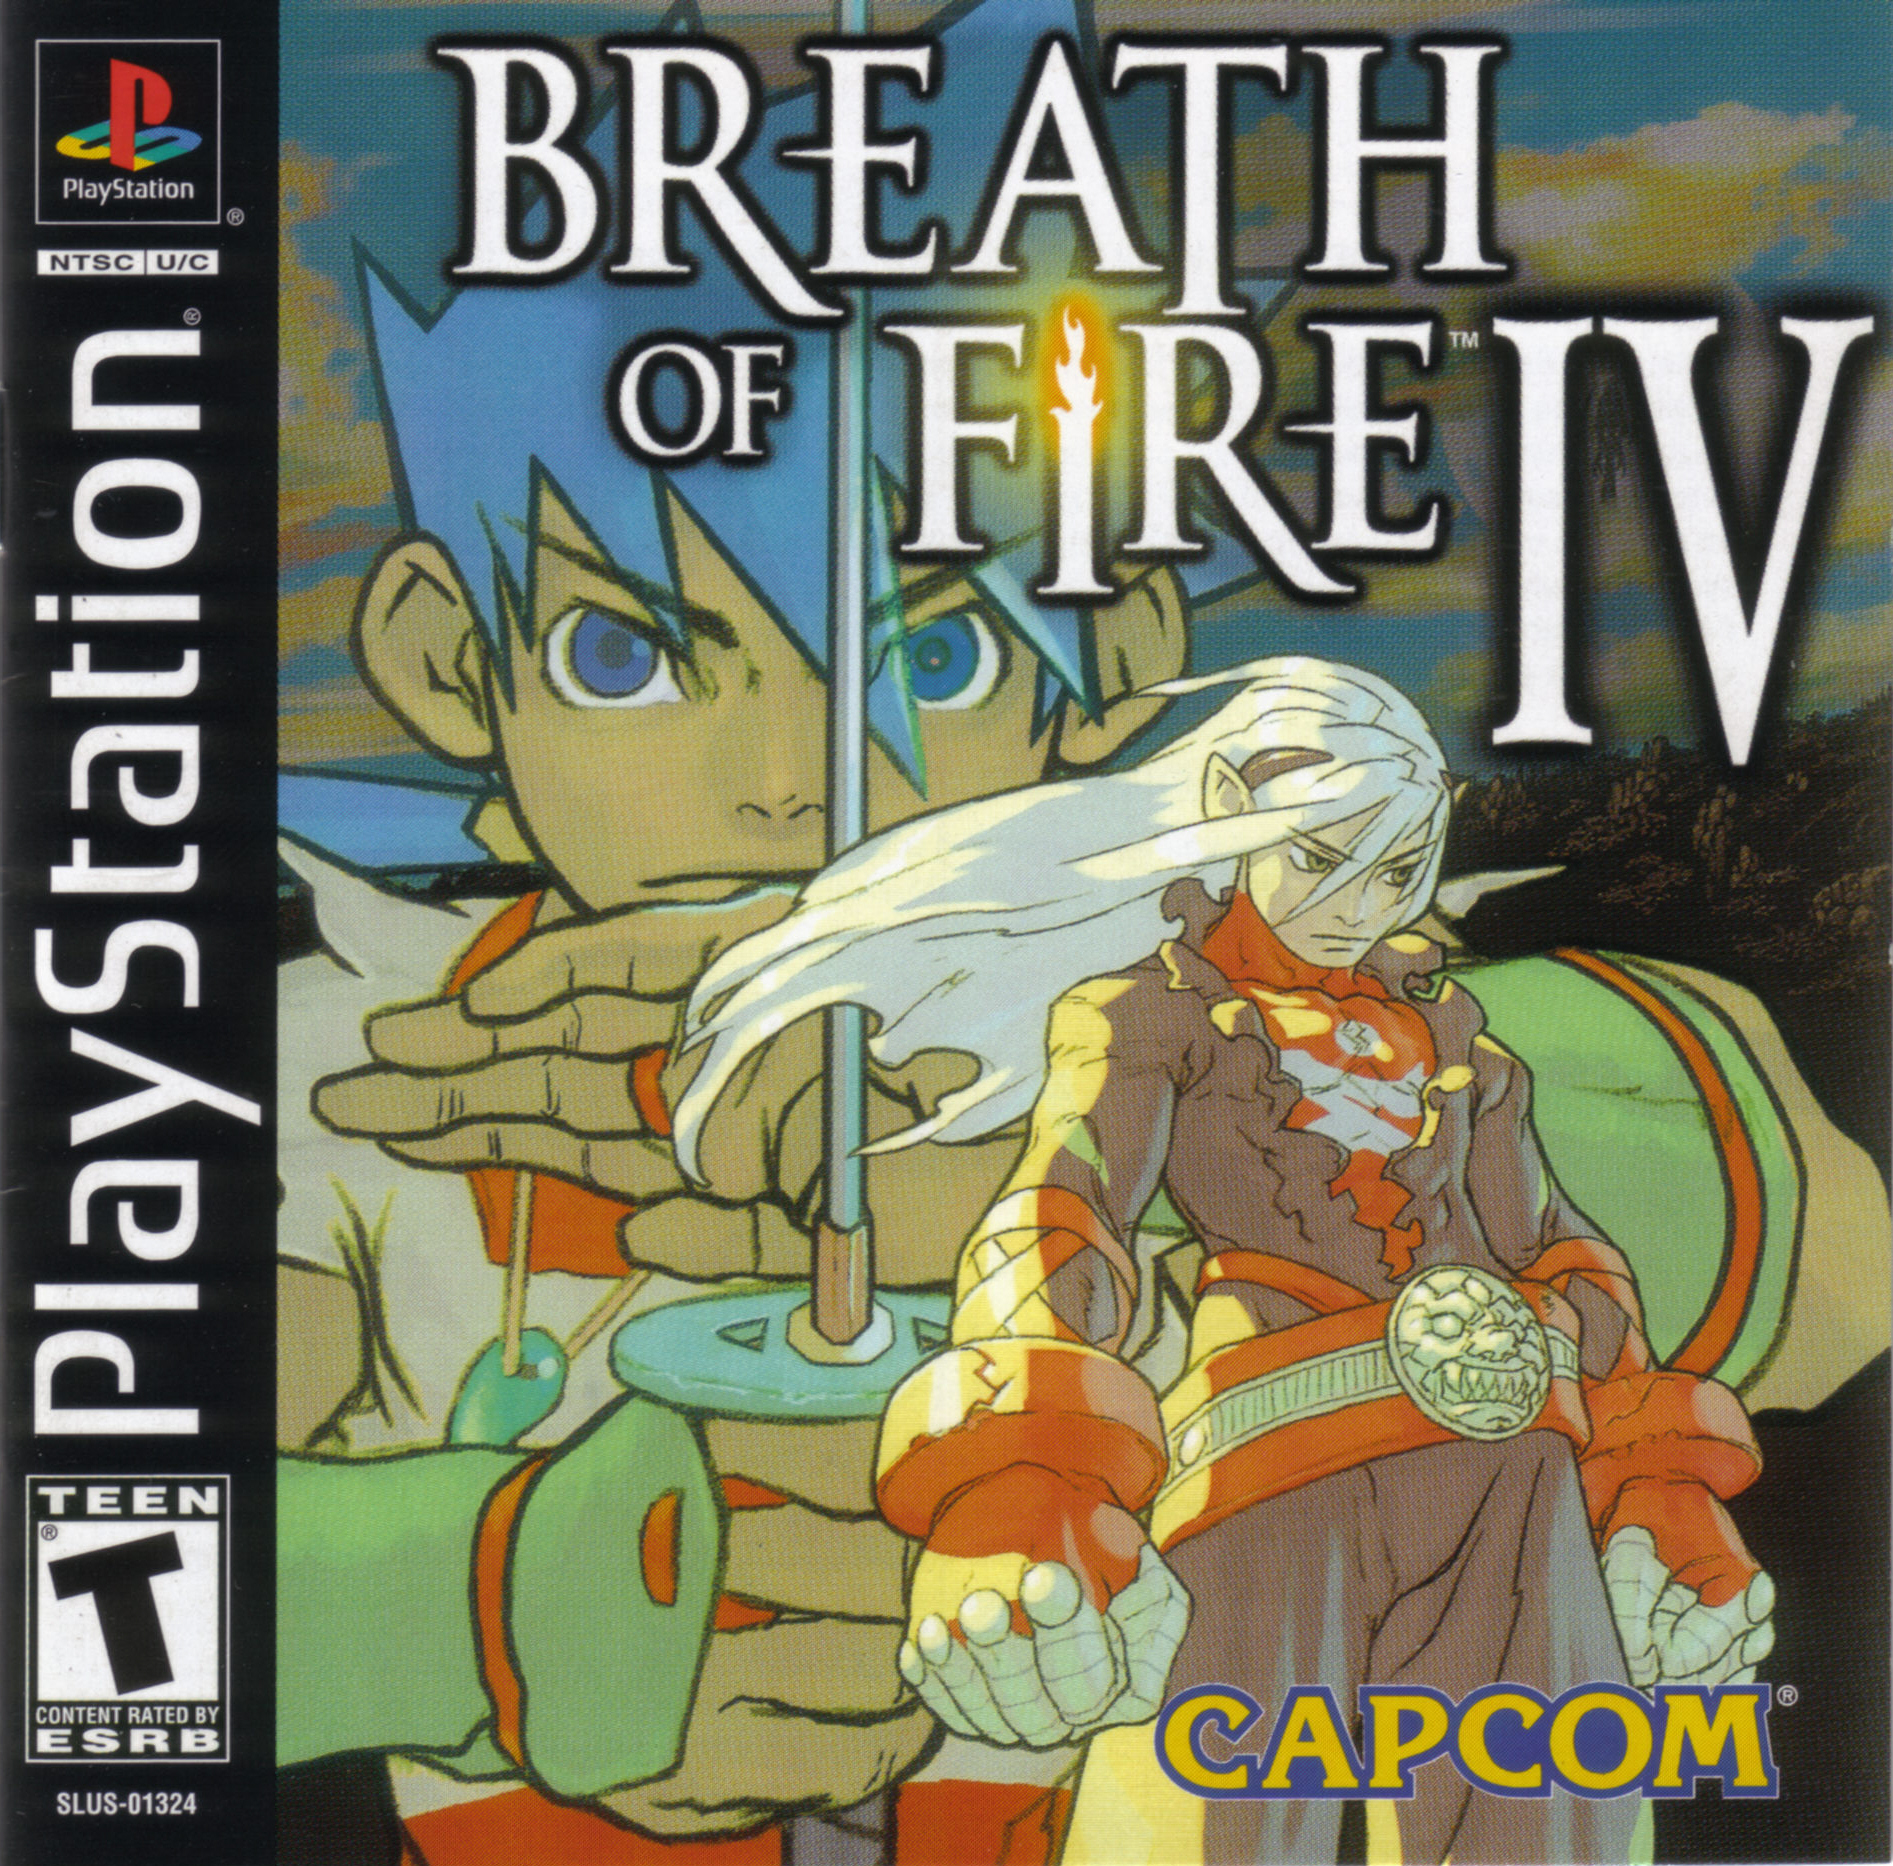 Breath of fire 4 iso torrent bittorrent android wont download mms